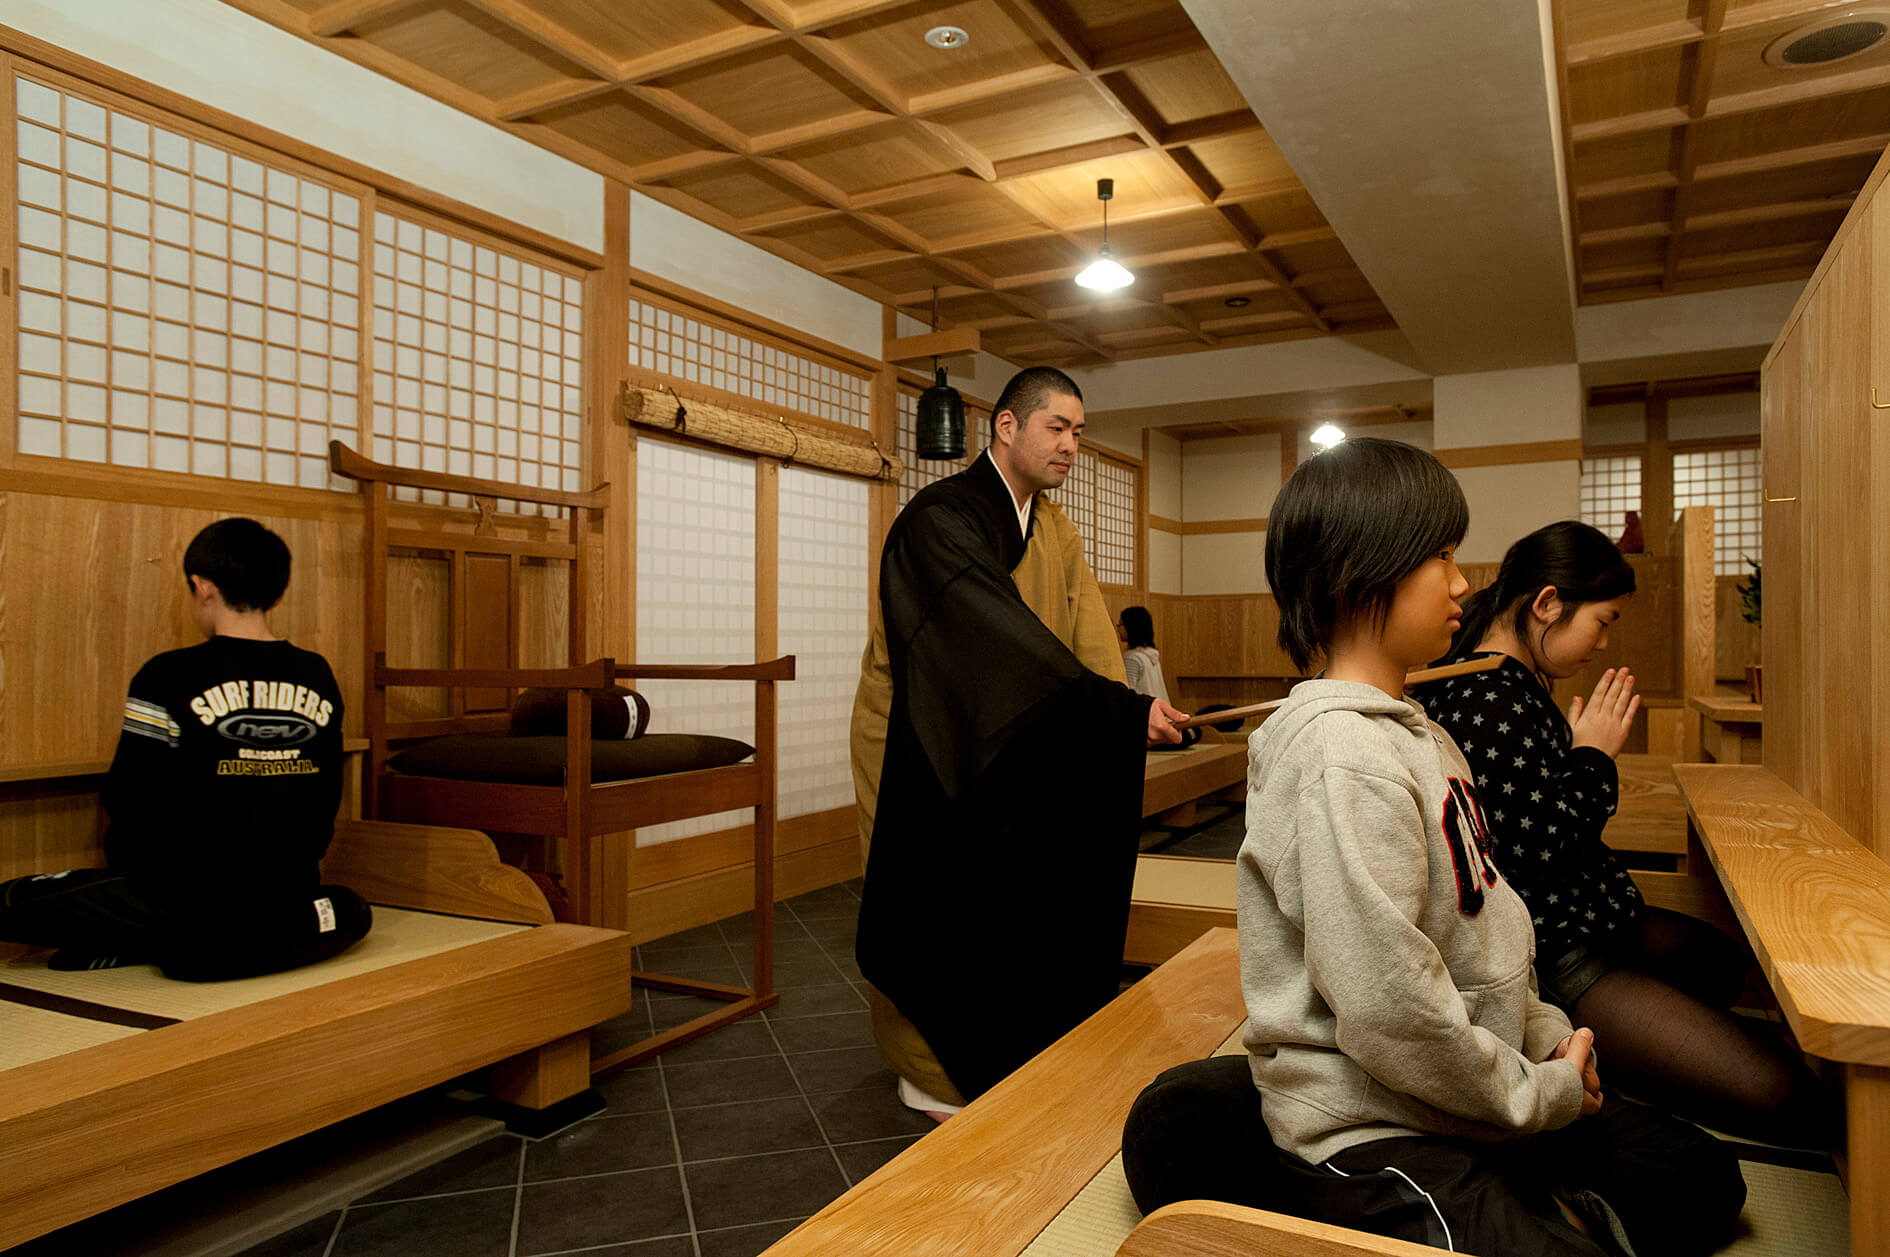 Daioji Temple, Date City: Share in Japanese Spiritual Practices